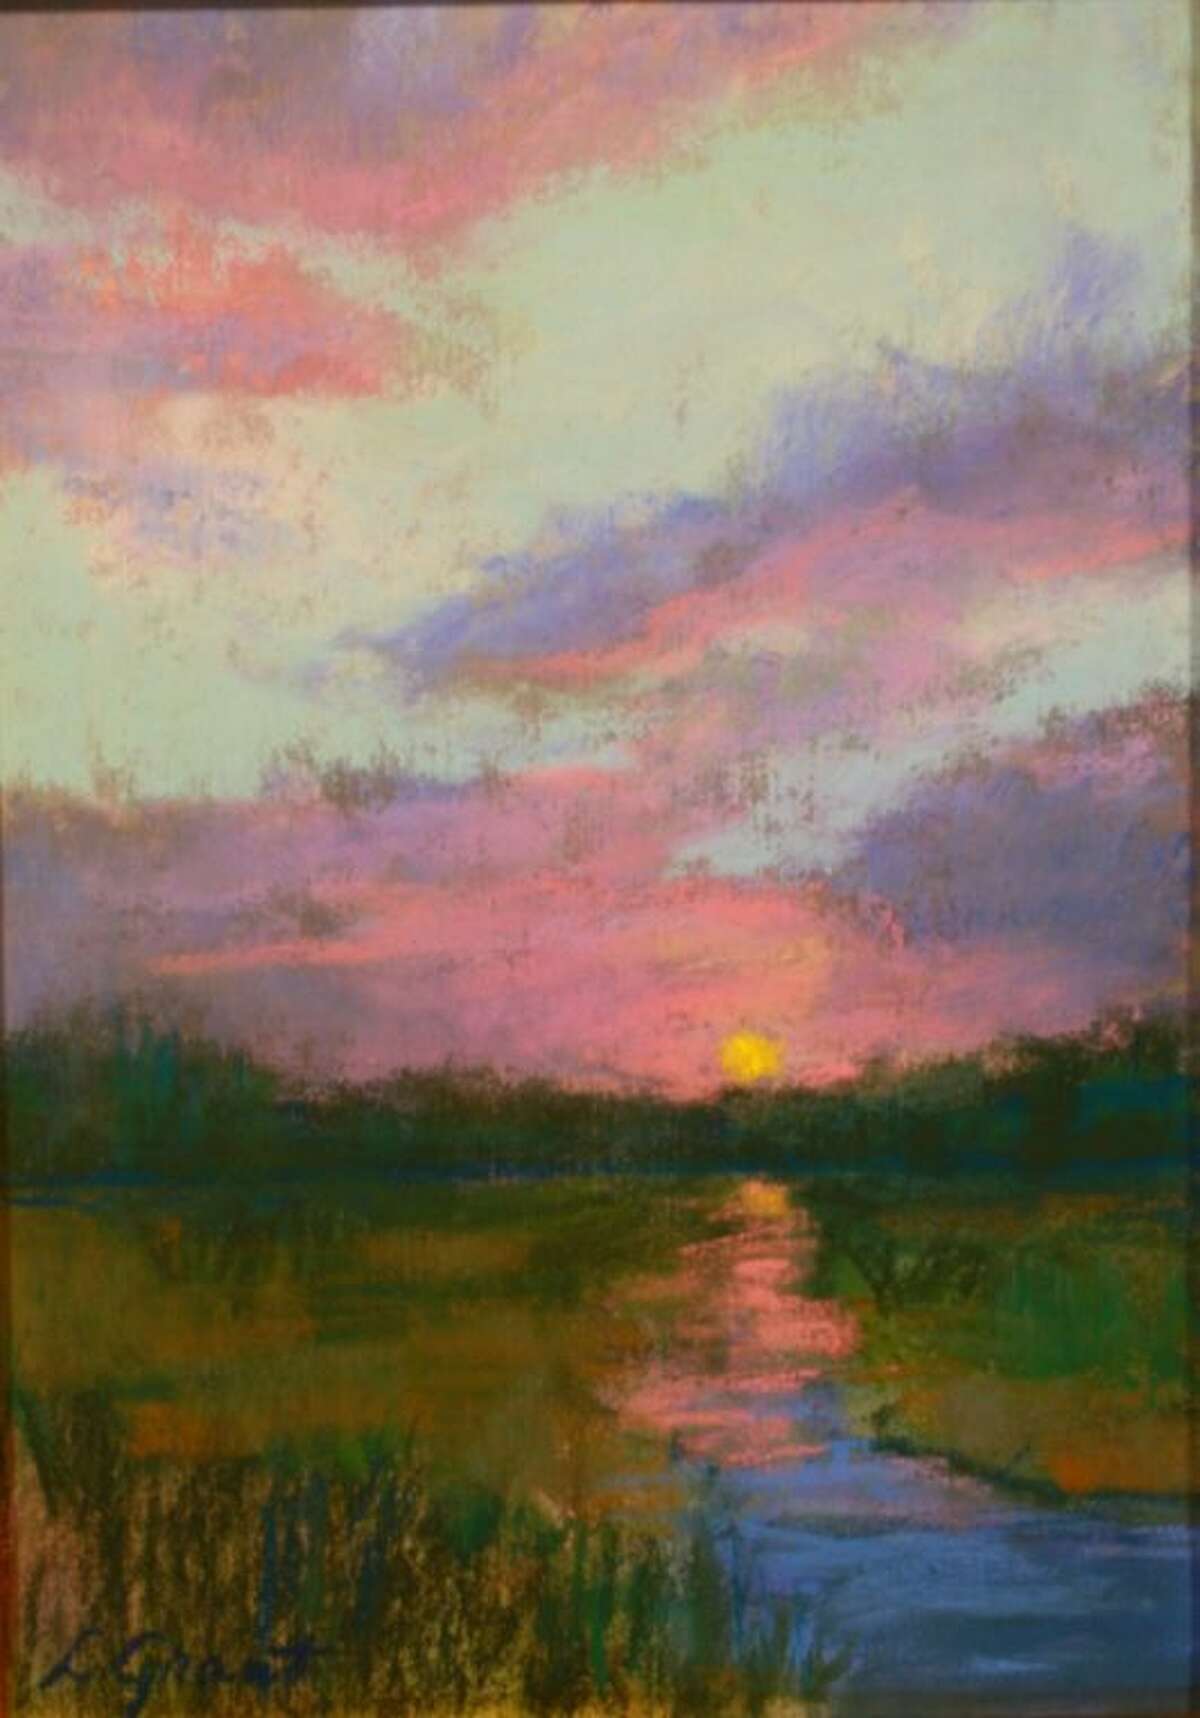 The Conroe Art League’s Spring Judged Show Best of Show winner, a pastel painting titled "Sunset," by LaVera Grant is now on display at the Gallery at the Madeley Building in downtown Conroe. The other winnings paintings featured with this article will be on display at the art league gallery as well.